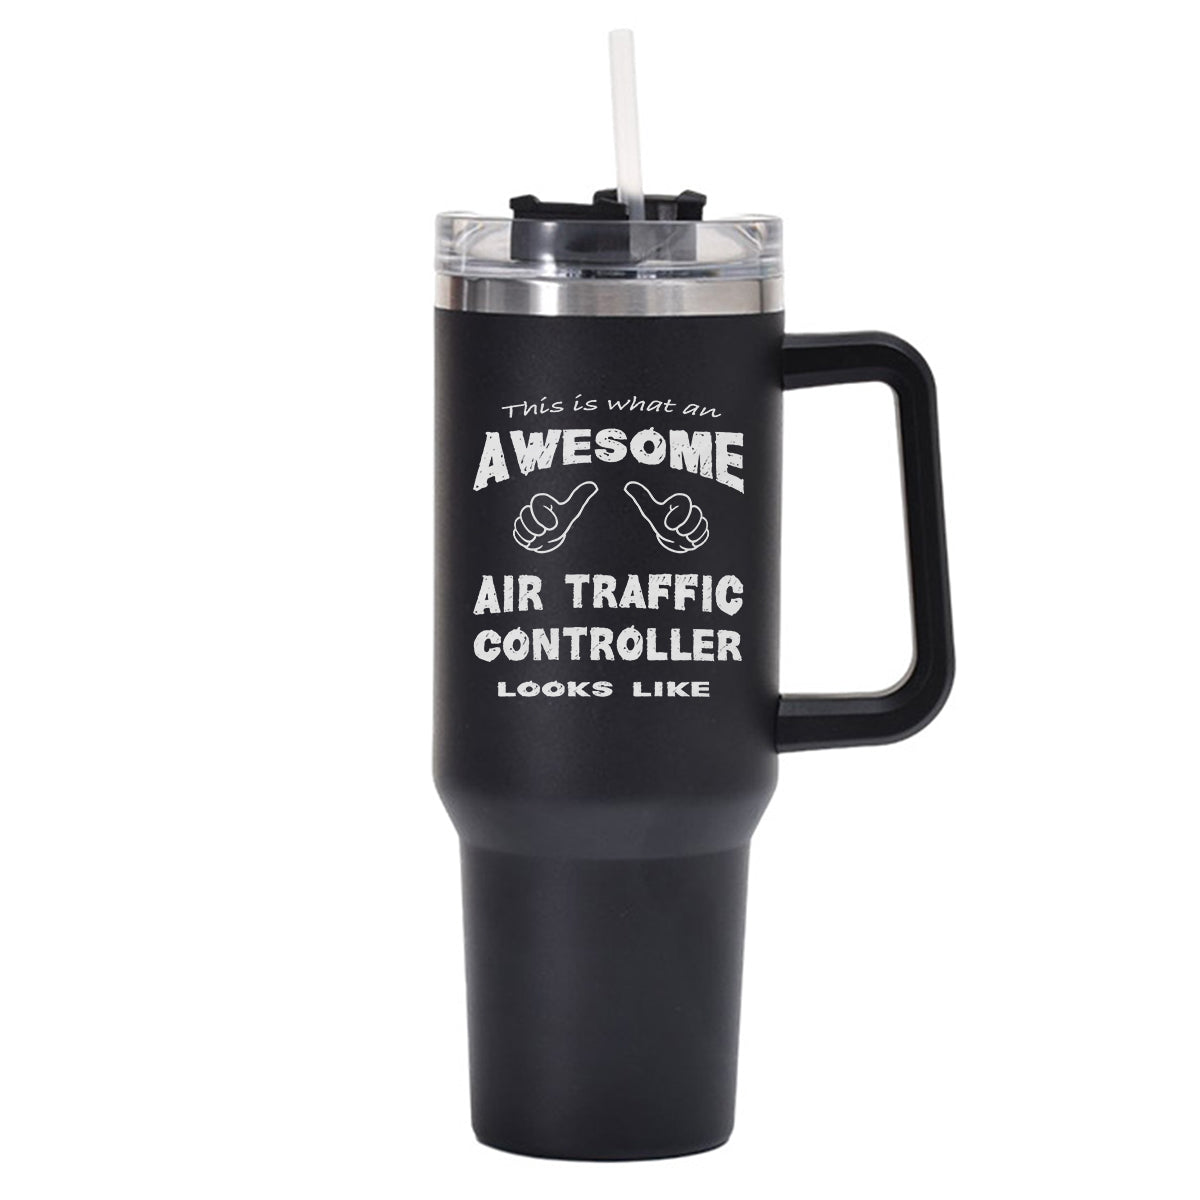 Air Traffic Controller Designed 40oz Stainless Steel Car Mug With Holder